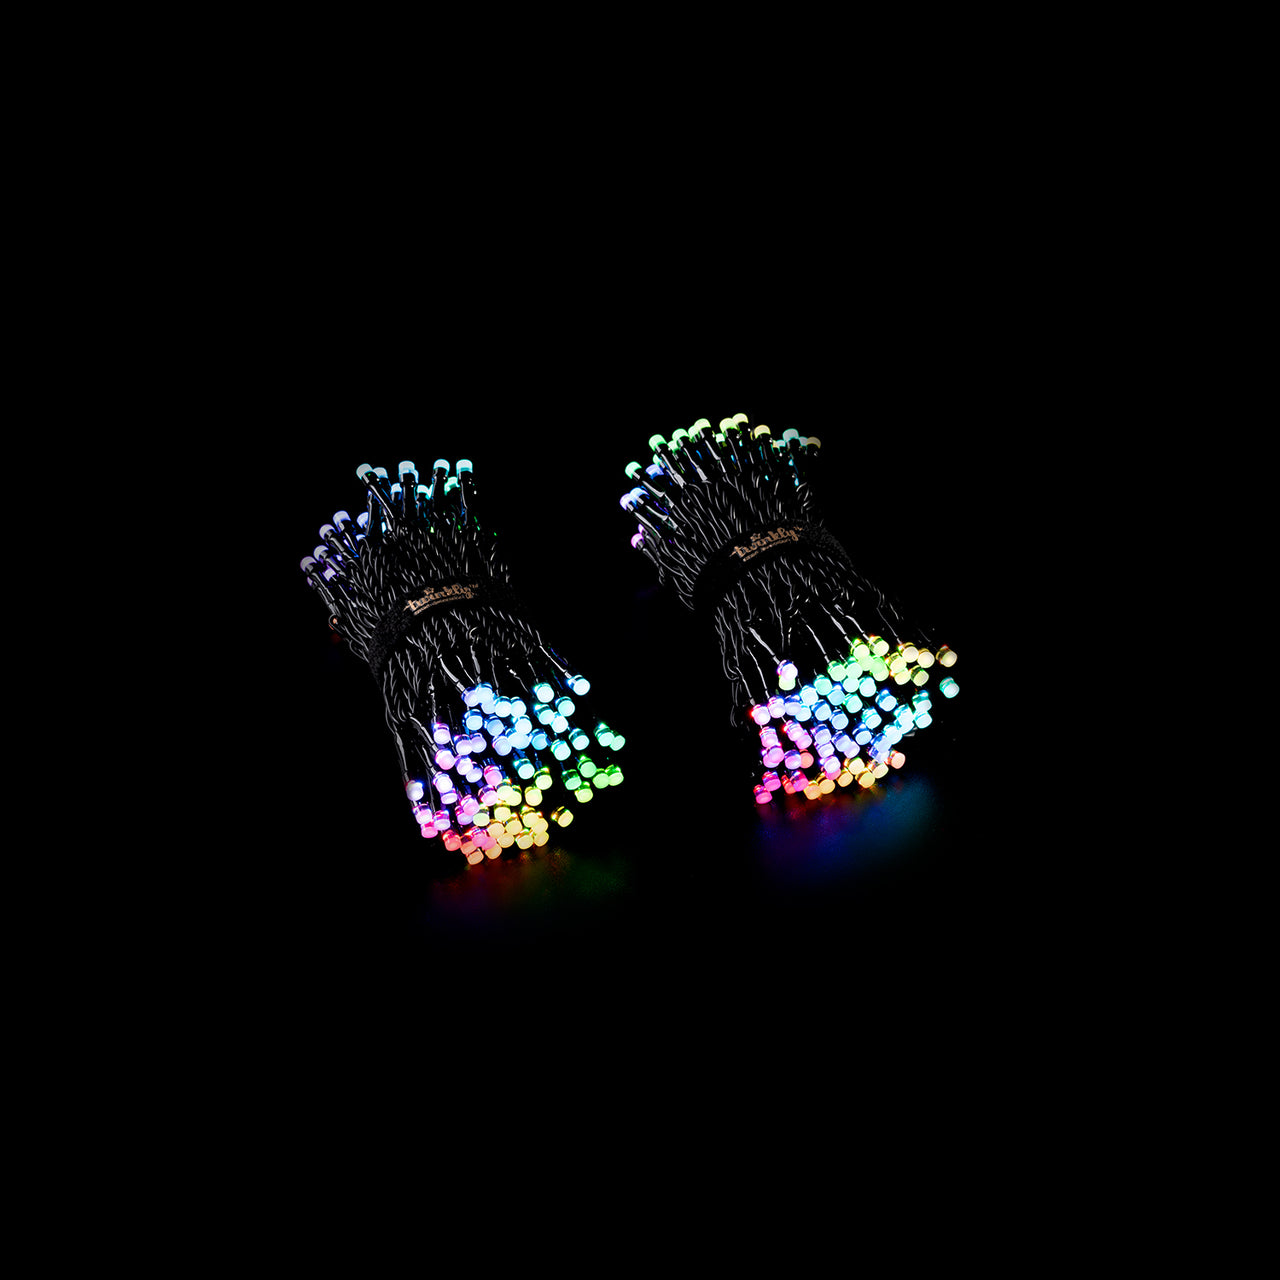 32m 400 LED Twinkly Smart App Controlled String Lights Multi Coloured & White Edition